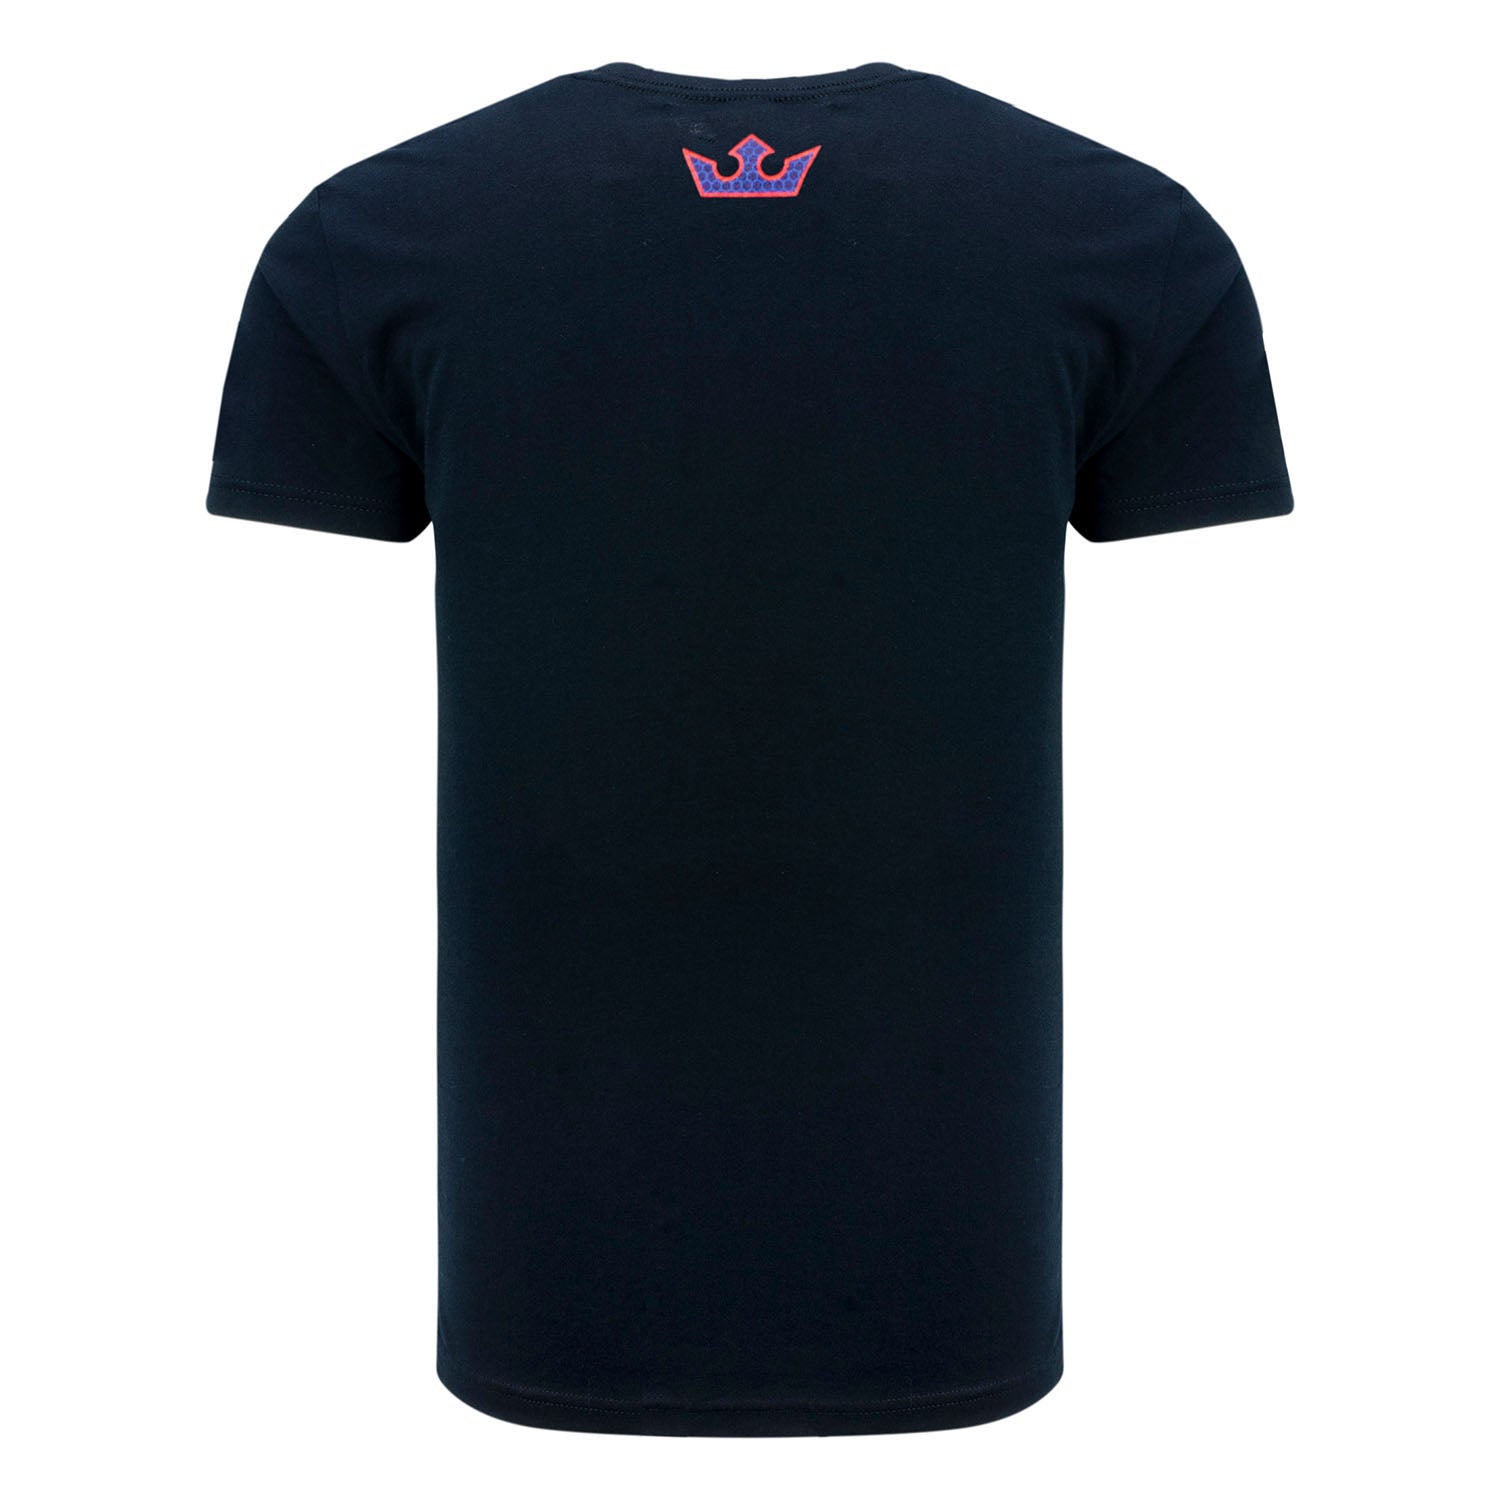 PFL Honeycomb Tee in Black - Front View